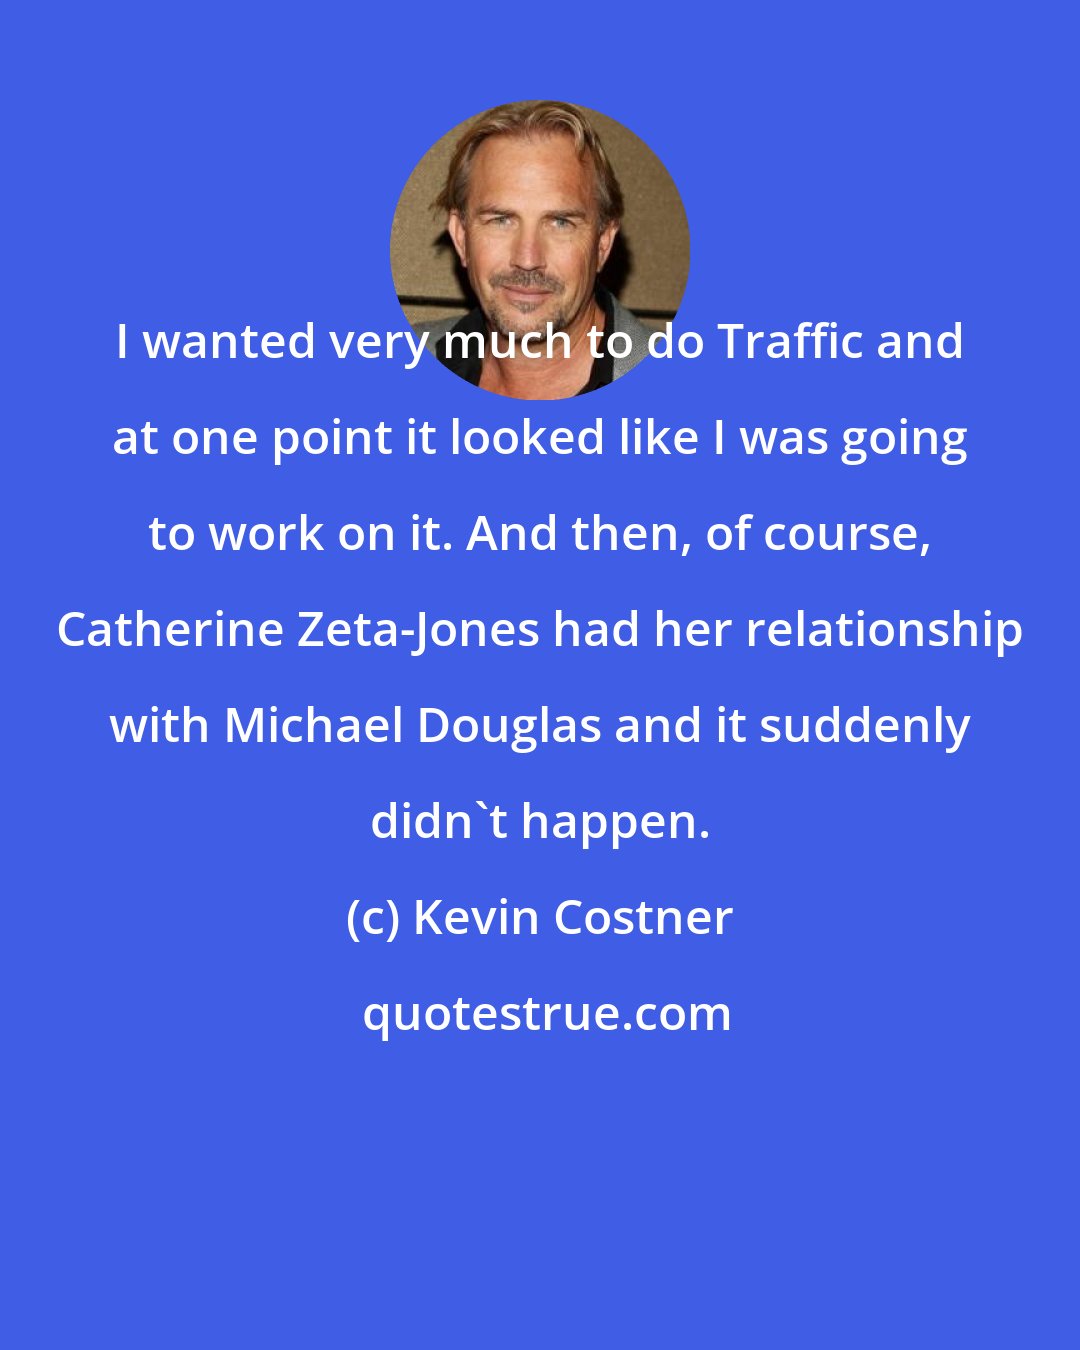 Kevin Costner: I wanted very much to do Traffic and at one point it looked like I was going to work on it. And then, of course, Catherine Zeta-Jones had her relationship with Michael Douglas and it suddenly didn't happen.